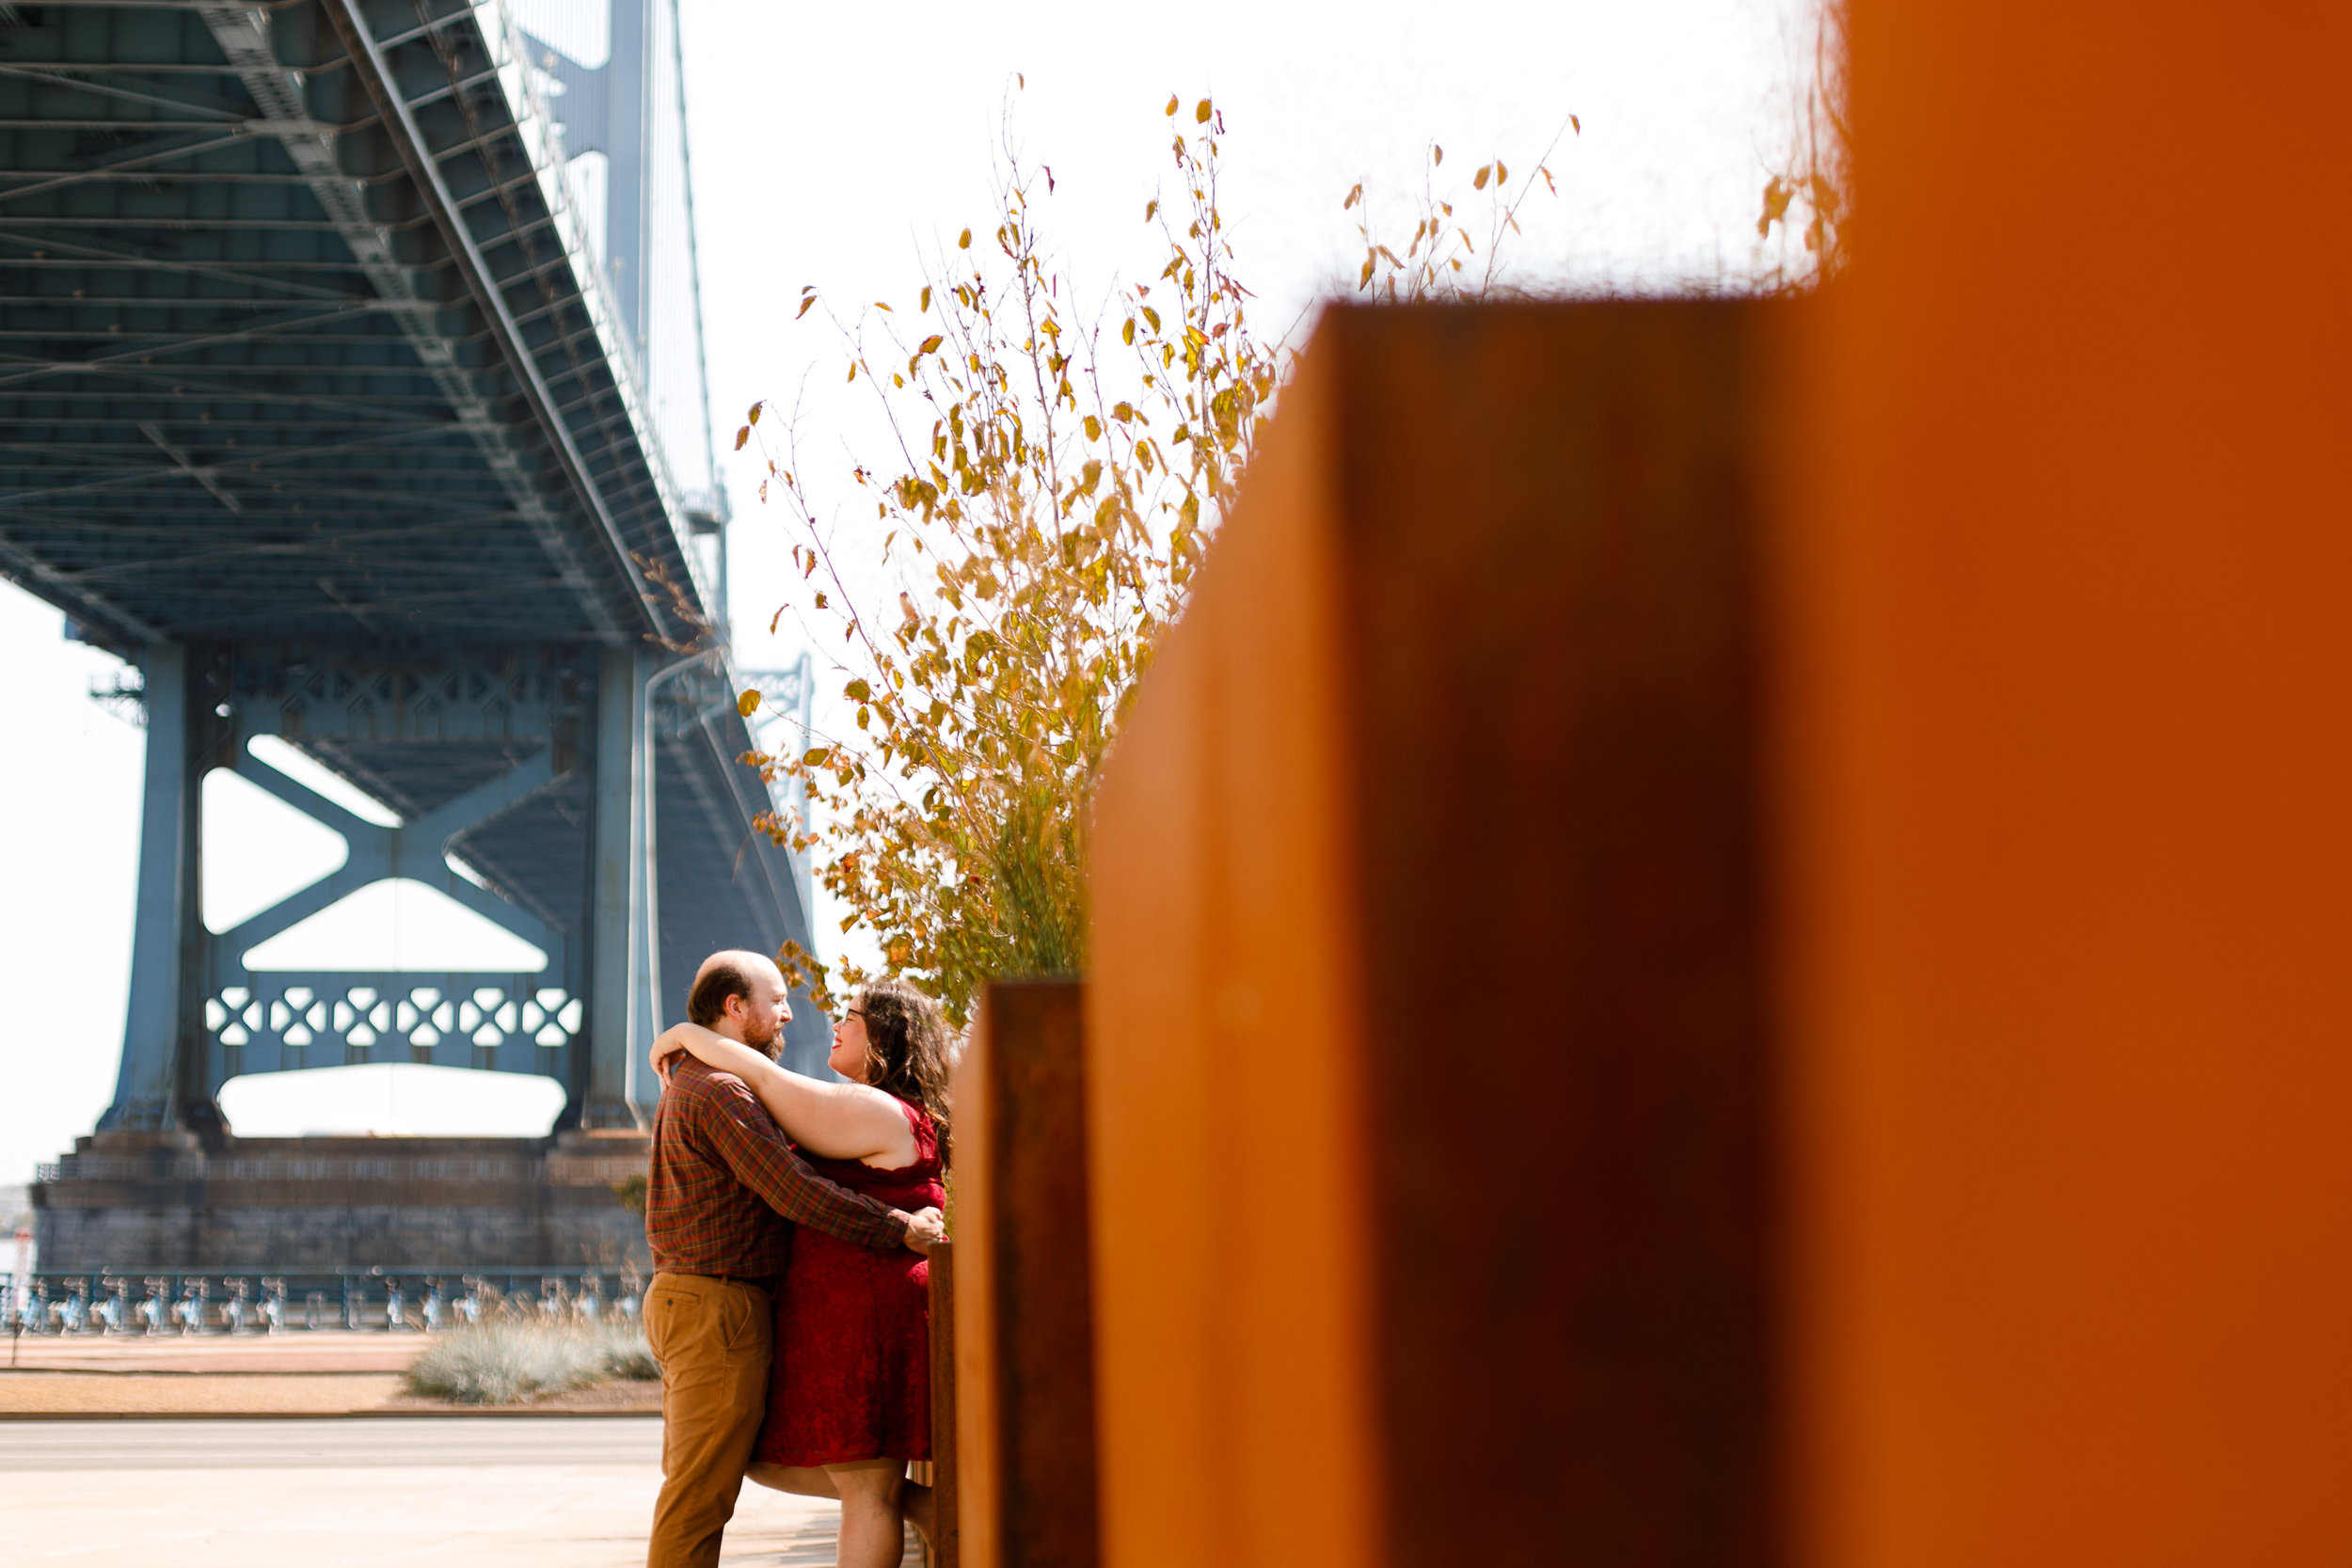 D&A Old City Philly Couples Session Photo Location Ideas 36.jpg